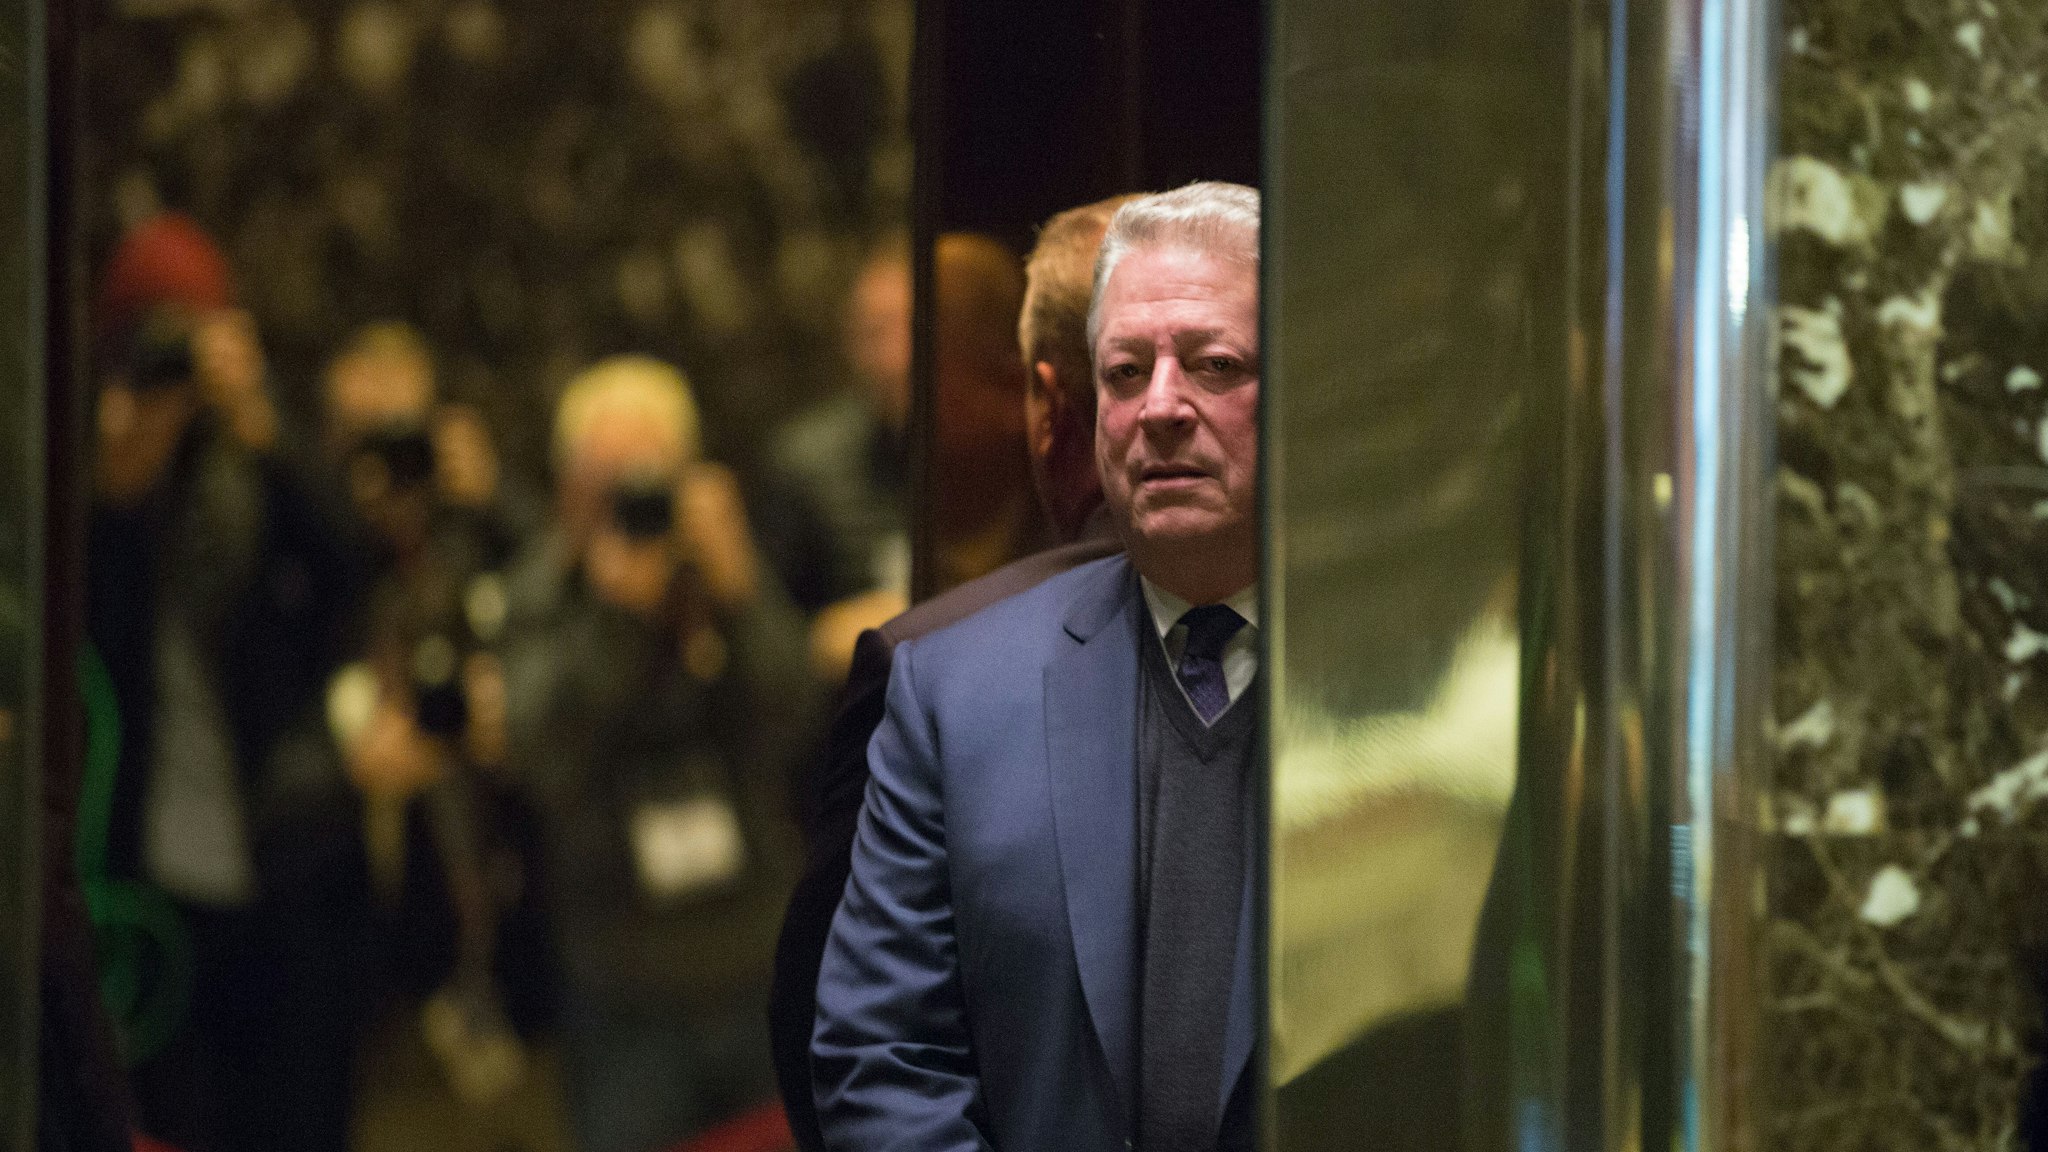 Former Vice President Al Gore arrives at Trump Tower on December 5, 2016 in New York City. President-elect Donald Trump has been holding daily meetings at the luxury high rise that bears his name since his election in November.